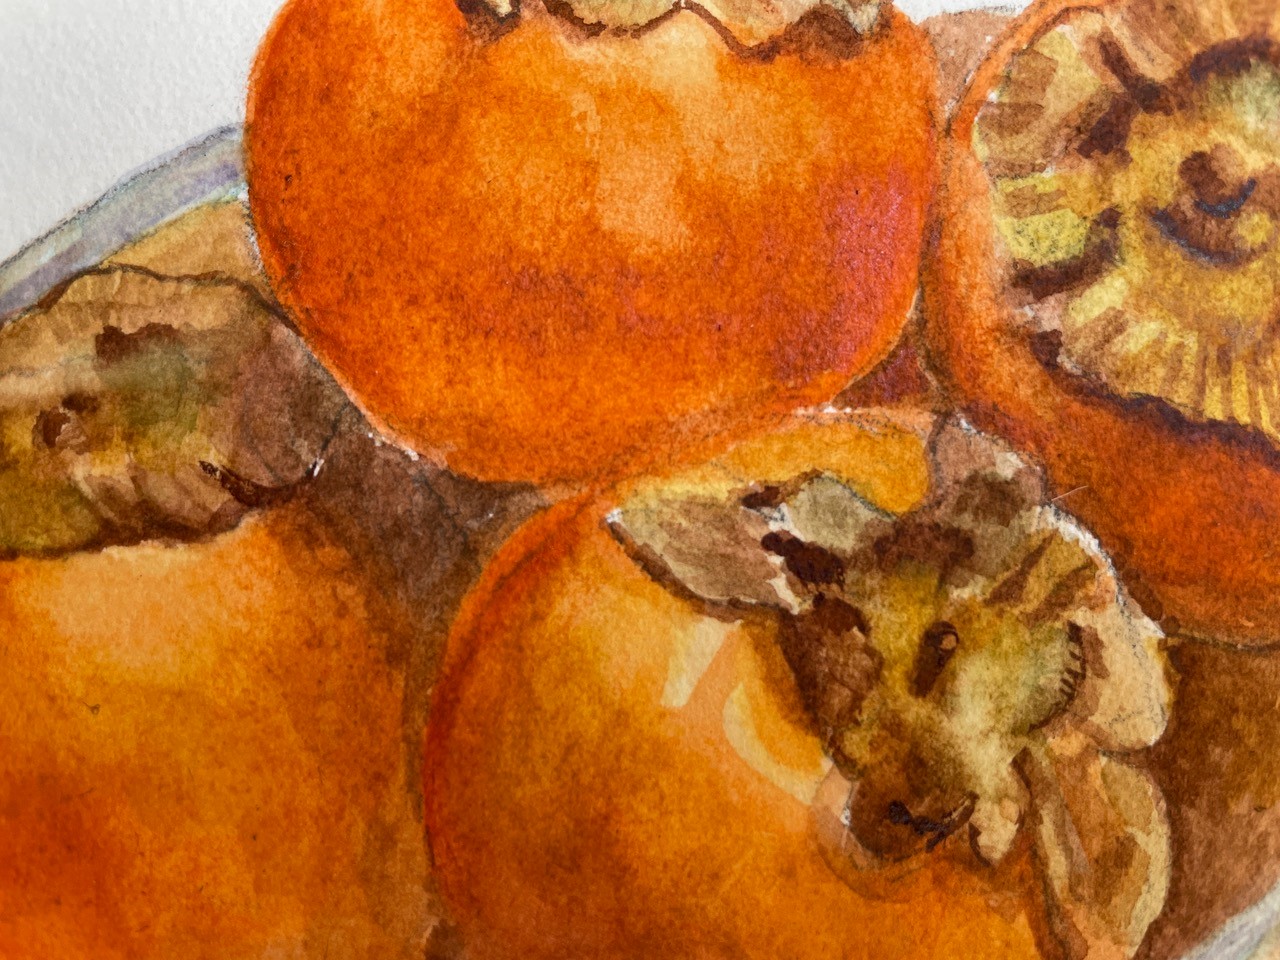 Persimmons I (detail), by Kelli Fifield